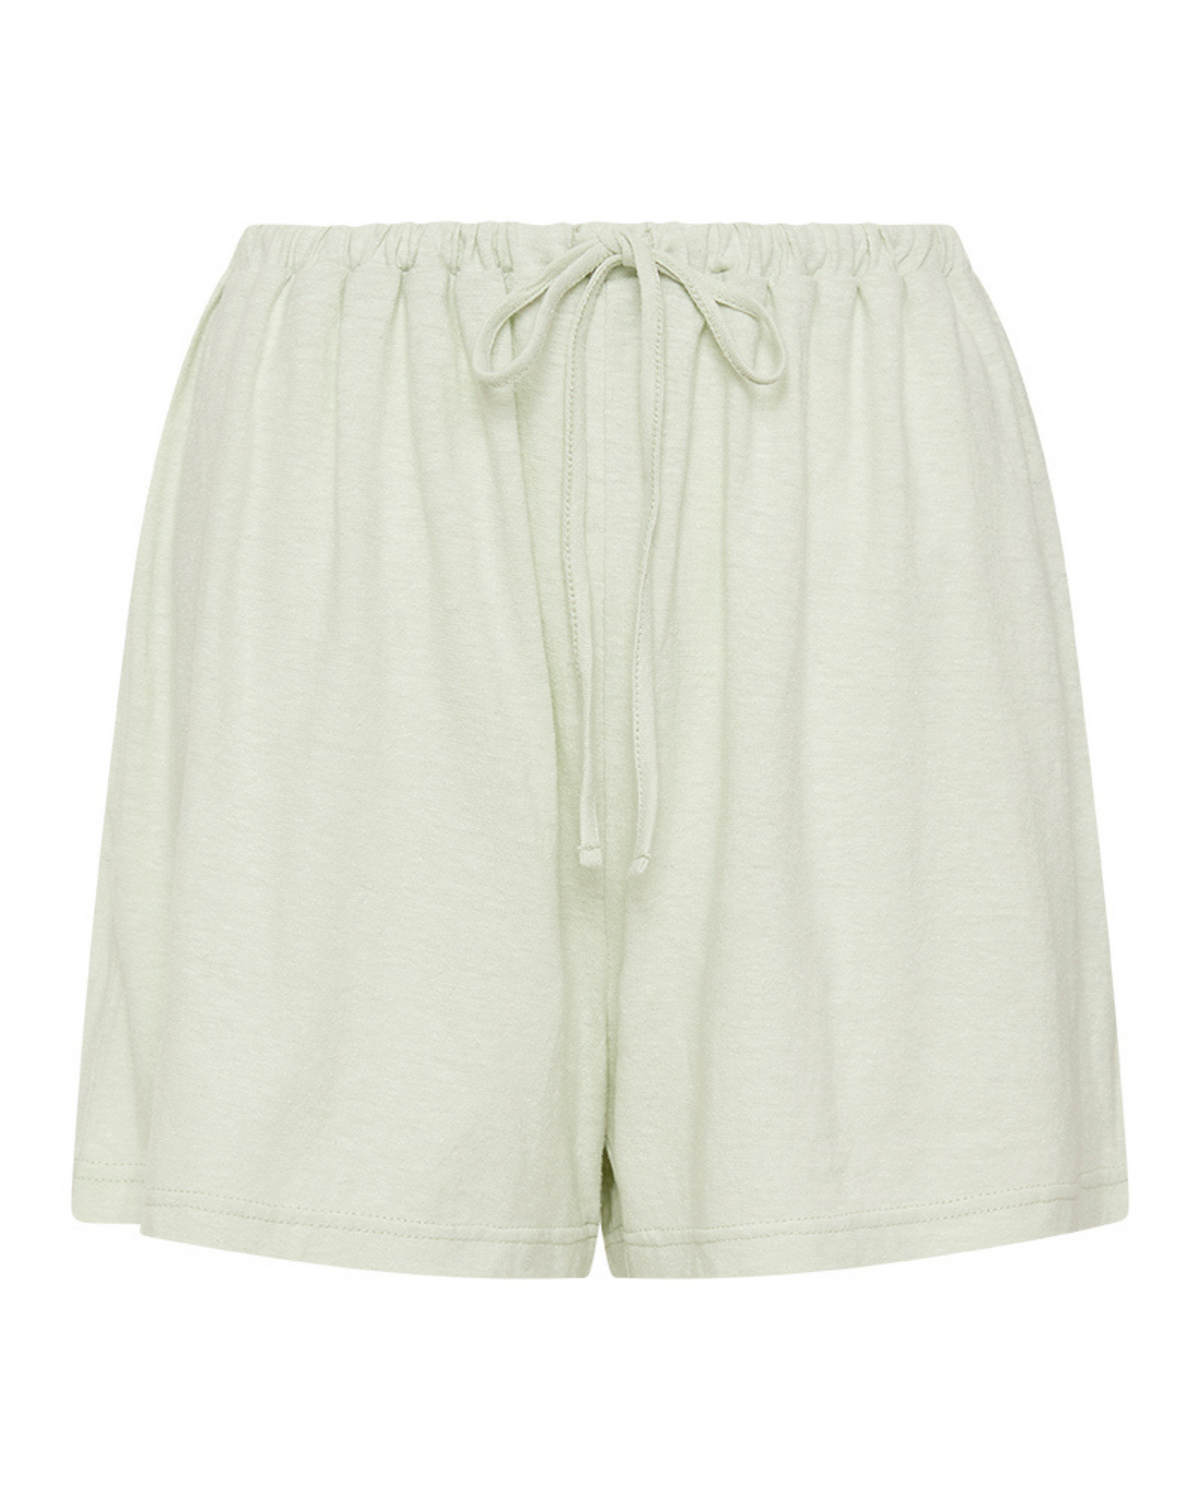 The Lounge Short